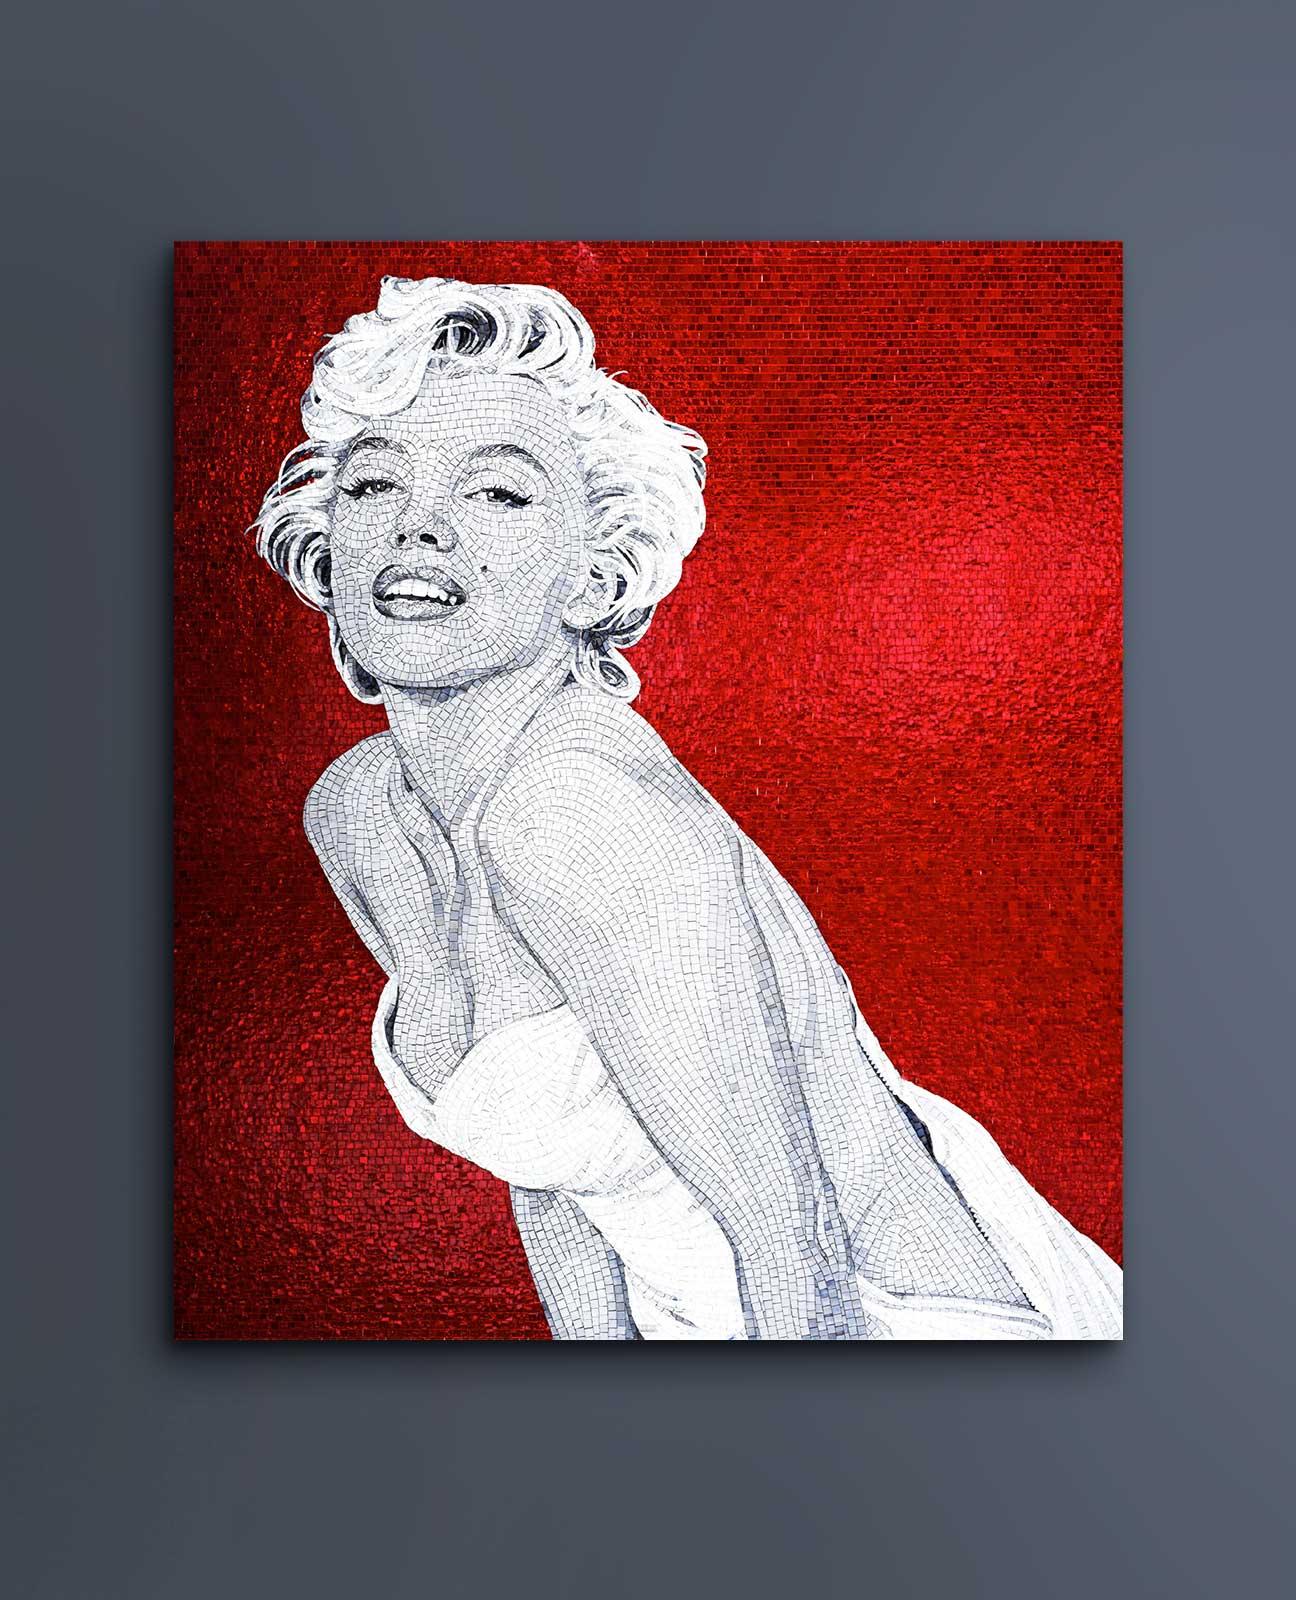 This colourful pop inspiration mosaic is an ode to the popular and unique Marilyn Monroe. The diva is still one of the most emblematic actresses of the big screen. Surrounded by multi-coloured elements, Monroe poses sensually looking to her fans.